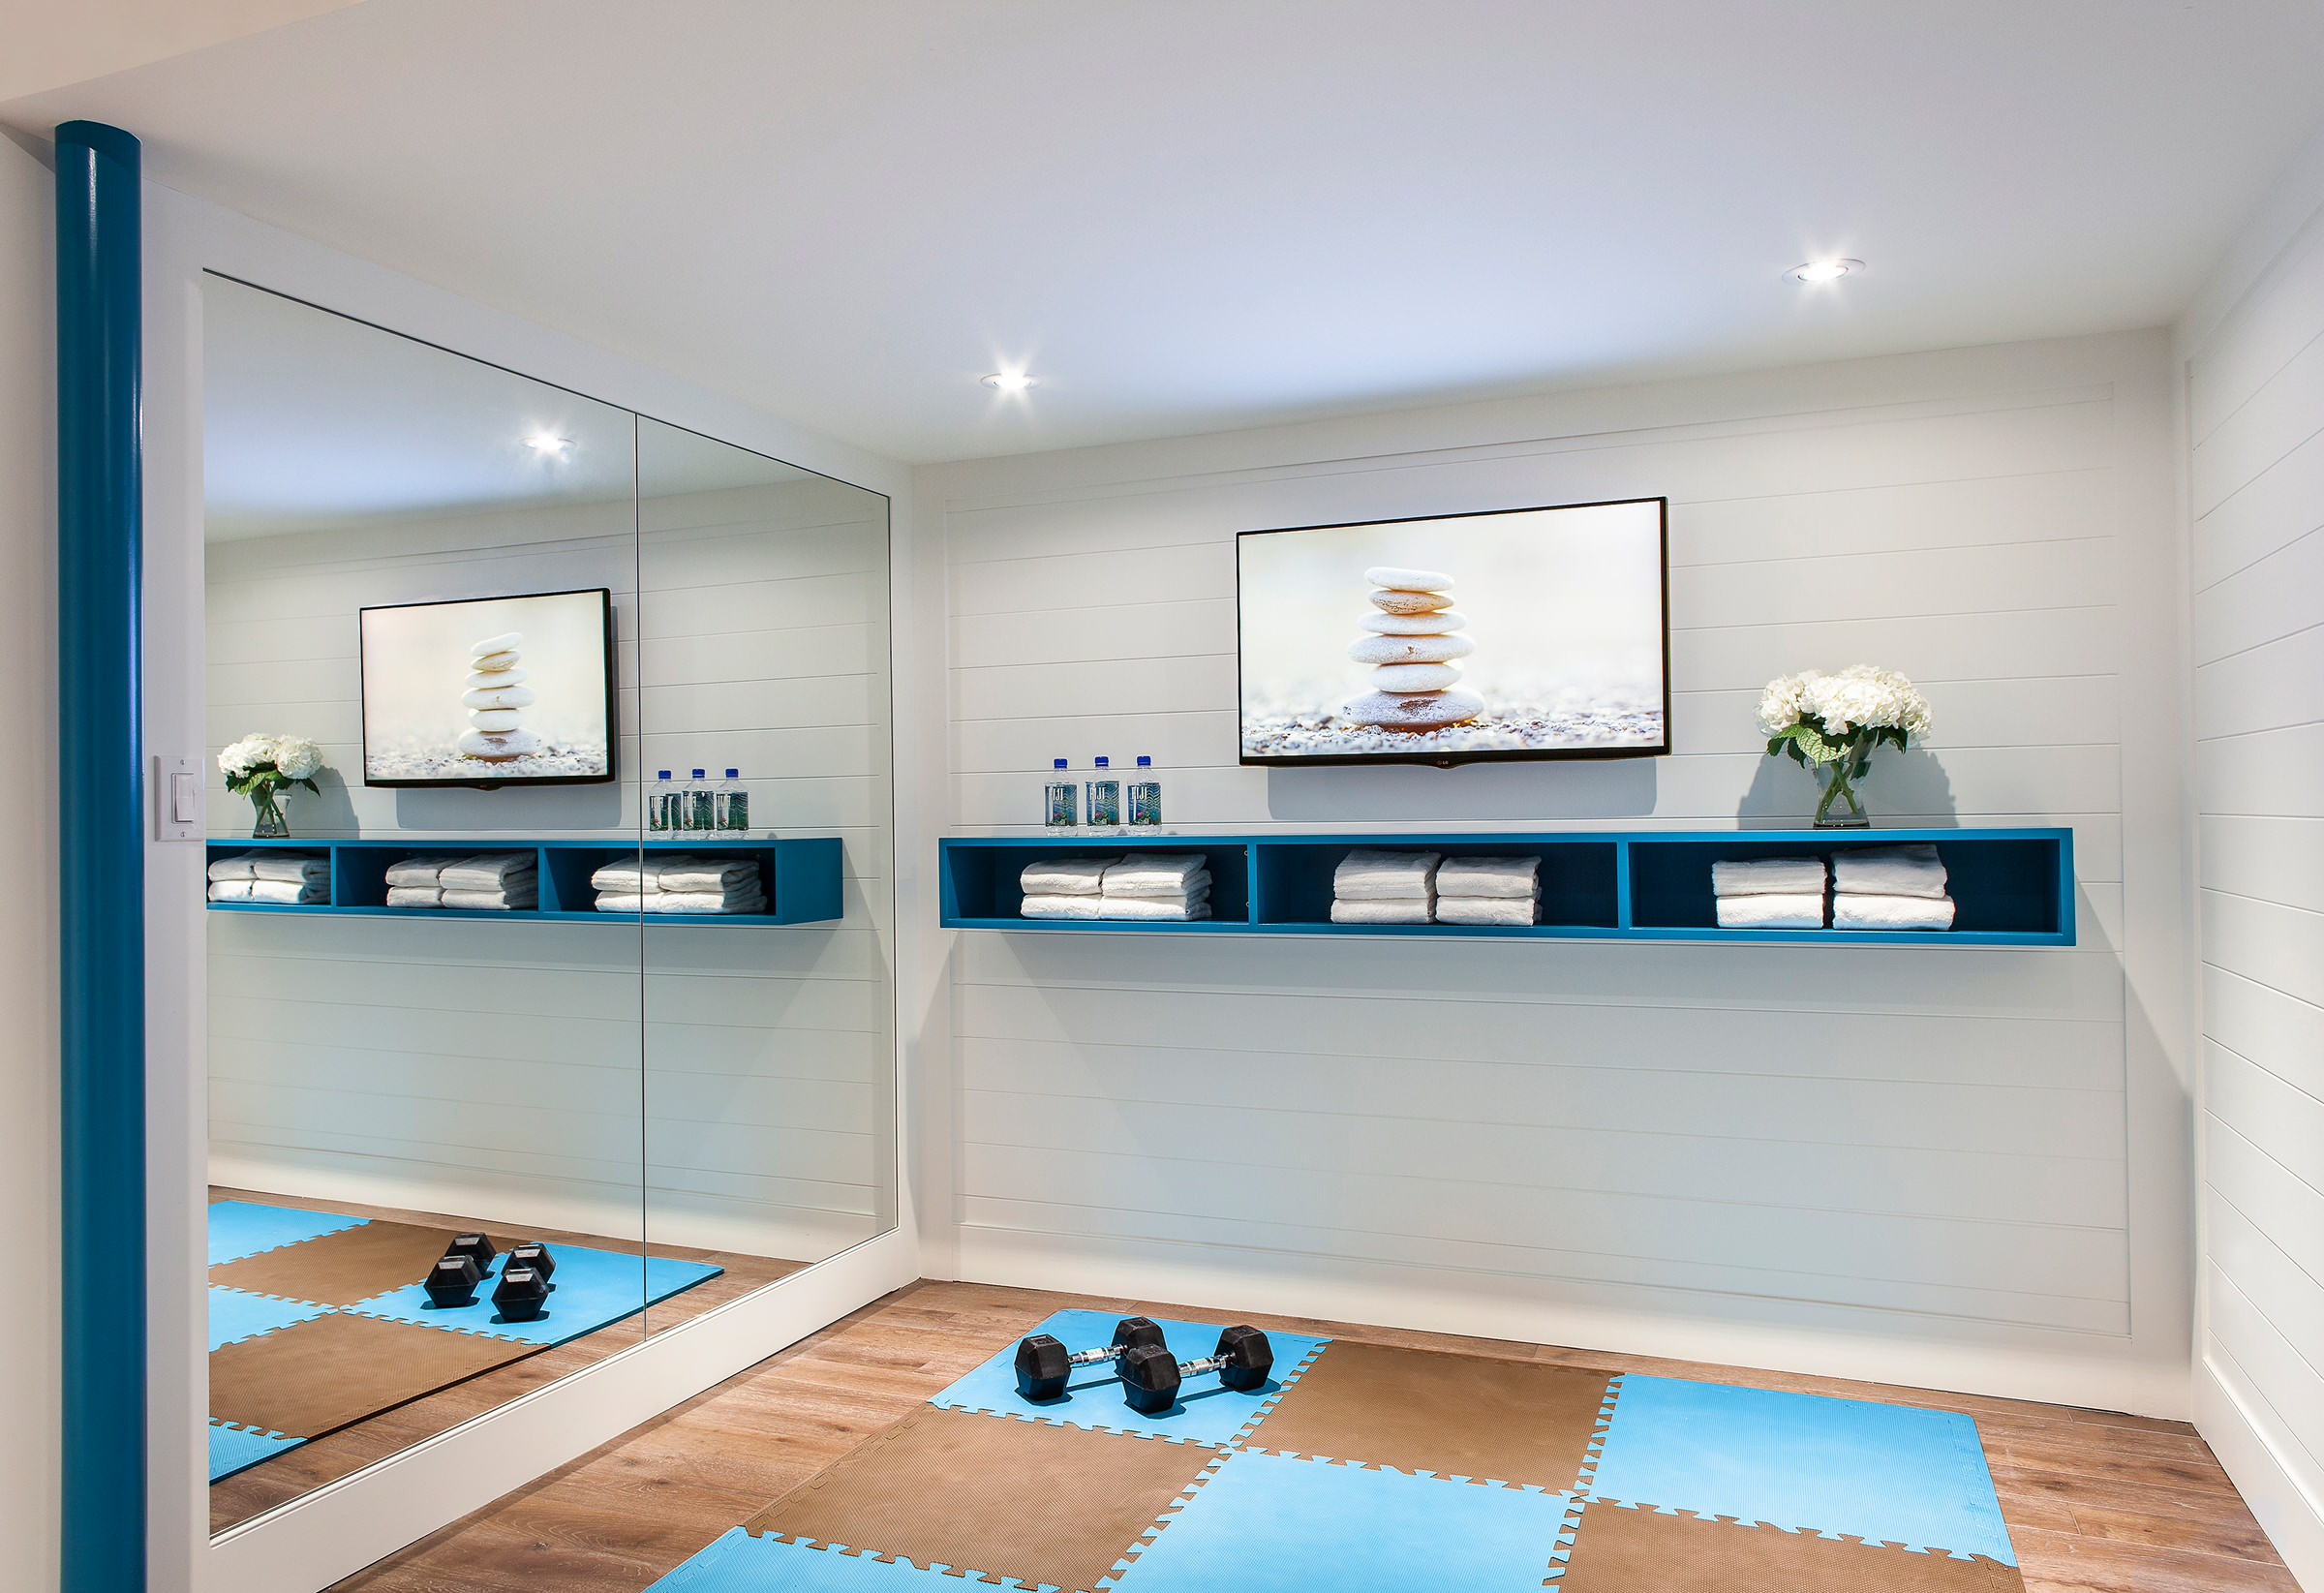 Top 10 Home Gym Design Ideas & Tips to Amp Up your Workout - Decorilla  Online Interior Design